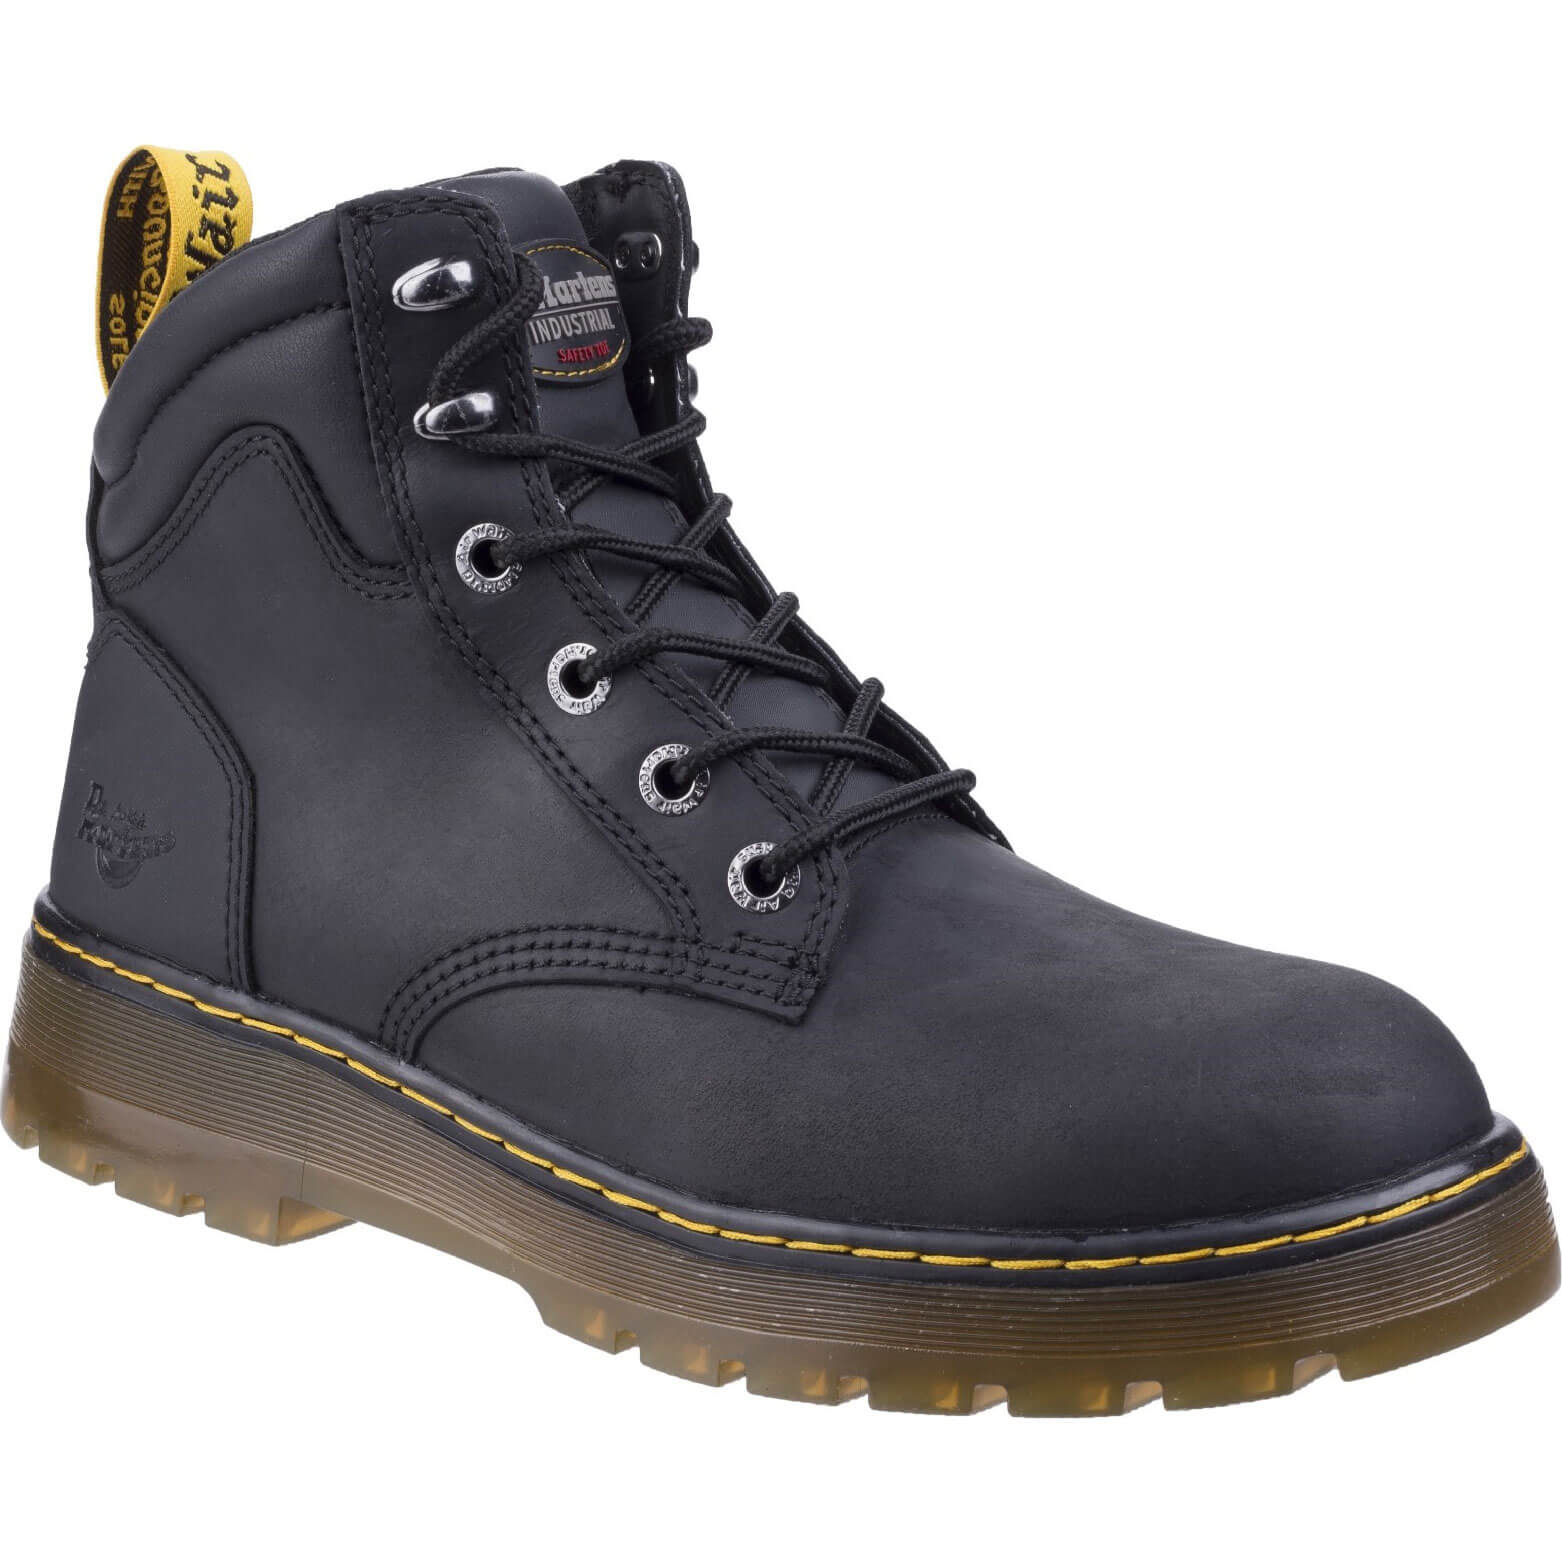 are dr martens good for hiking